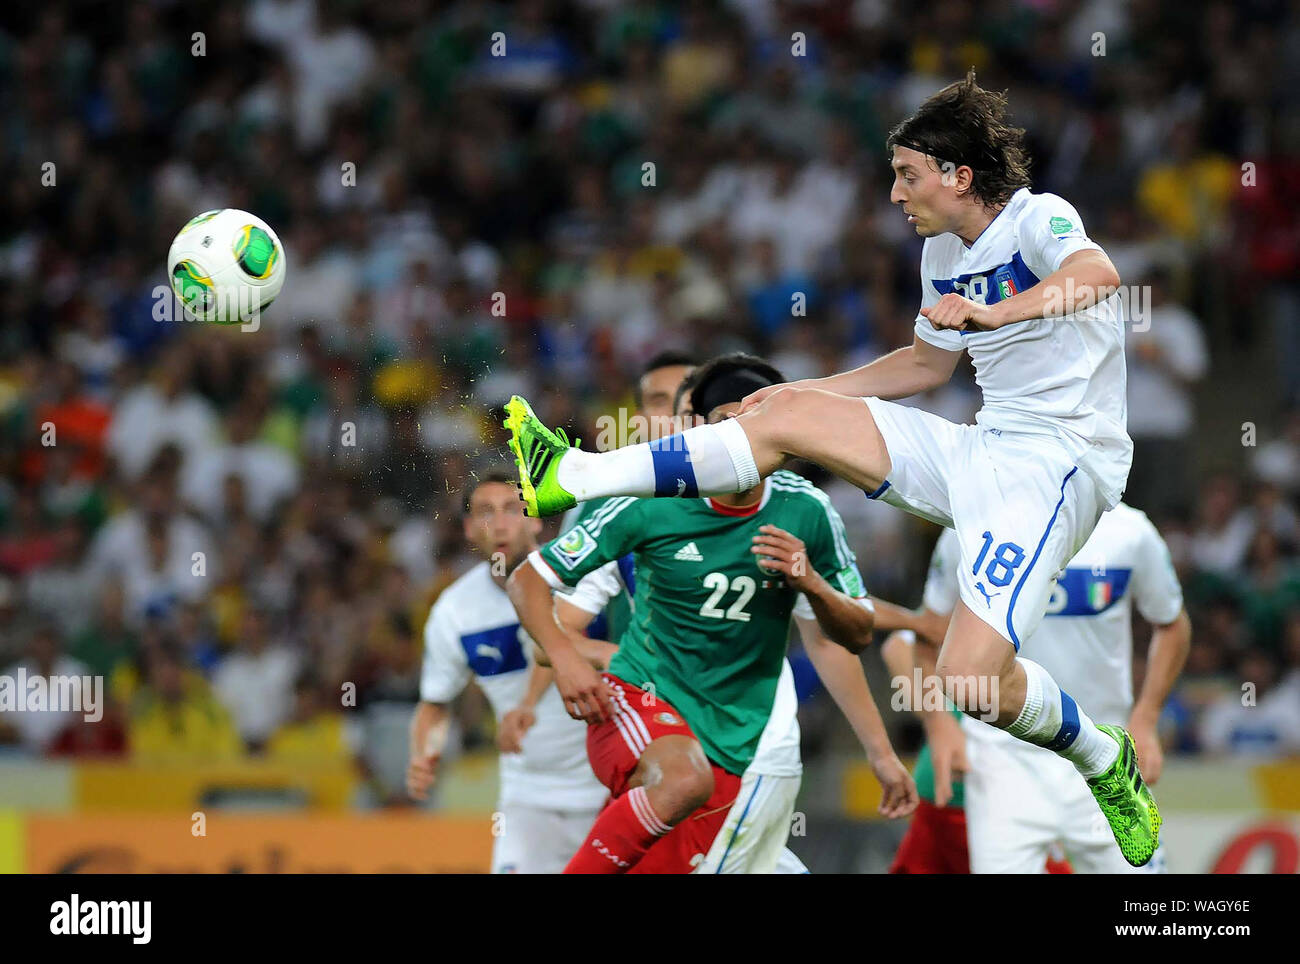 Rio de Janeiro, Brazil, June 16, 2013. Players compete for the ball during the Mexico vs Italy match for the Confederations Cup at Maracana Stadium Stock Photo